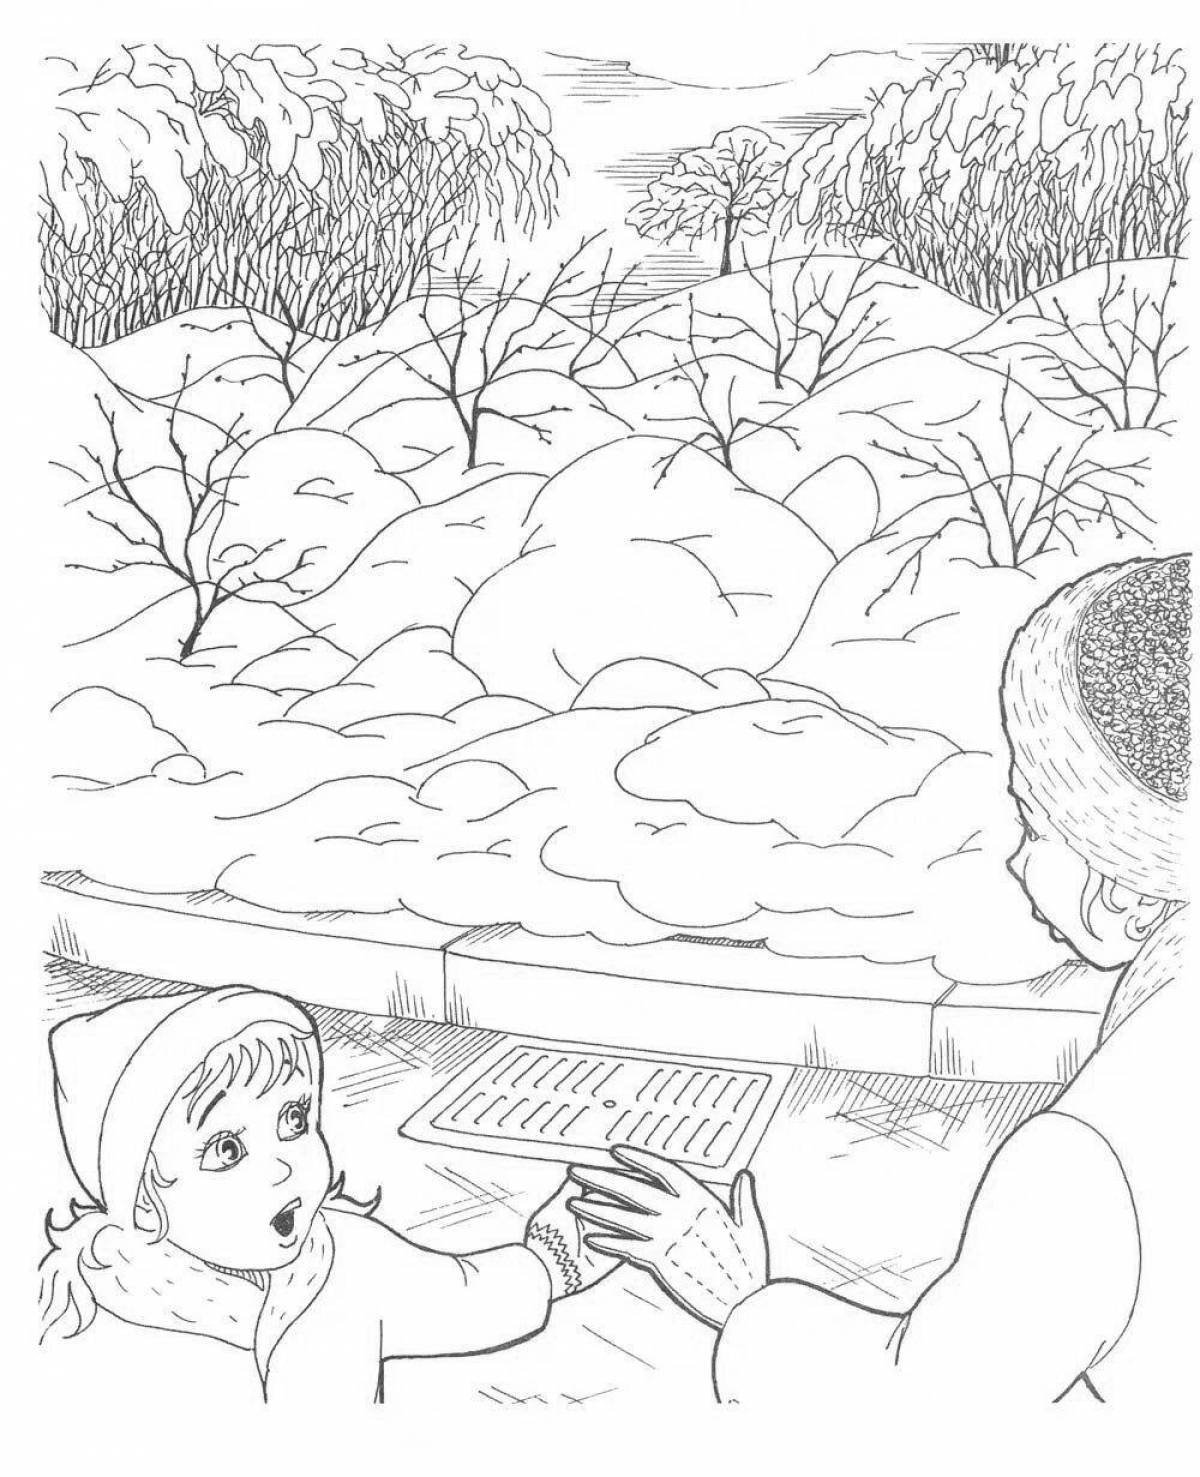 Great blizzard coloring book for kids